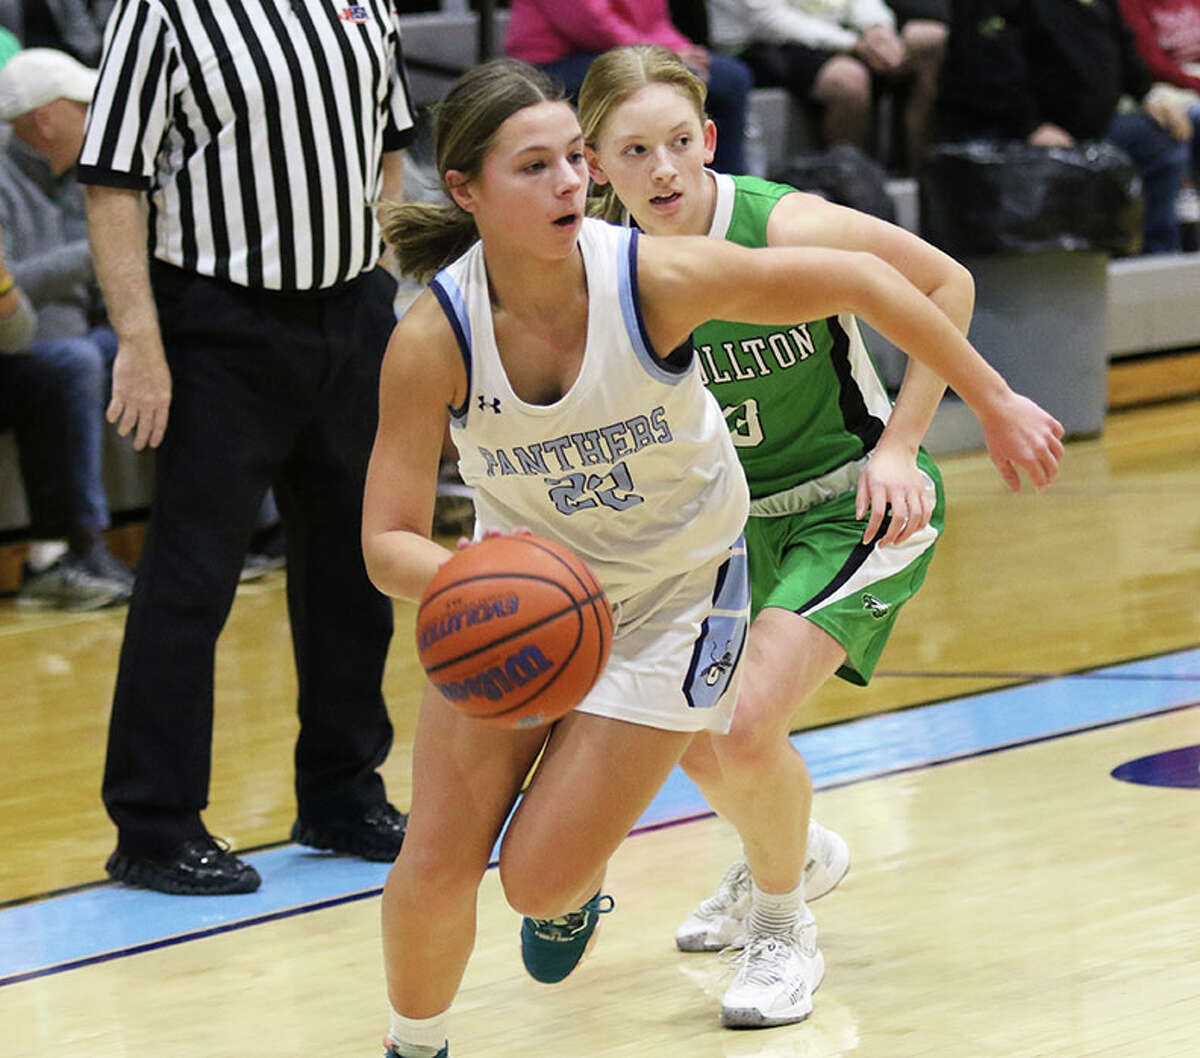 Jersey junior Tessa Crawford (left) drives past Carrollton's Ella Stumpf in a game earlier this month in Jerseyville. On Saturday, Crawford went past 1,000 points for her career in the Panthers' loss to Marquette at the Carrollton Tourney.